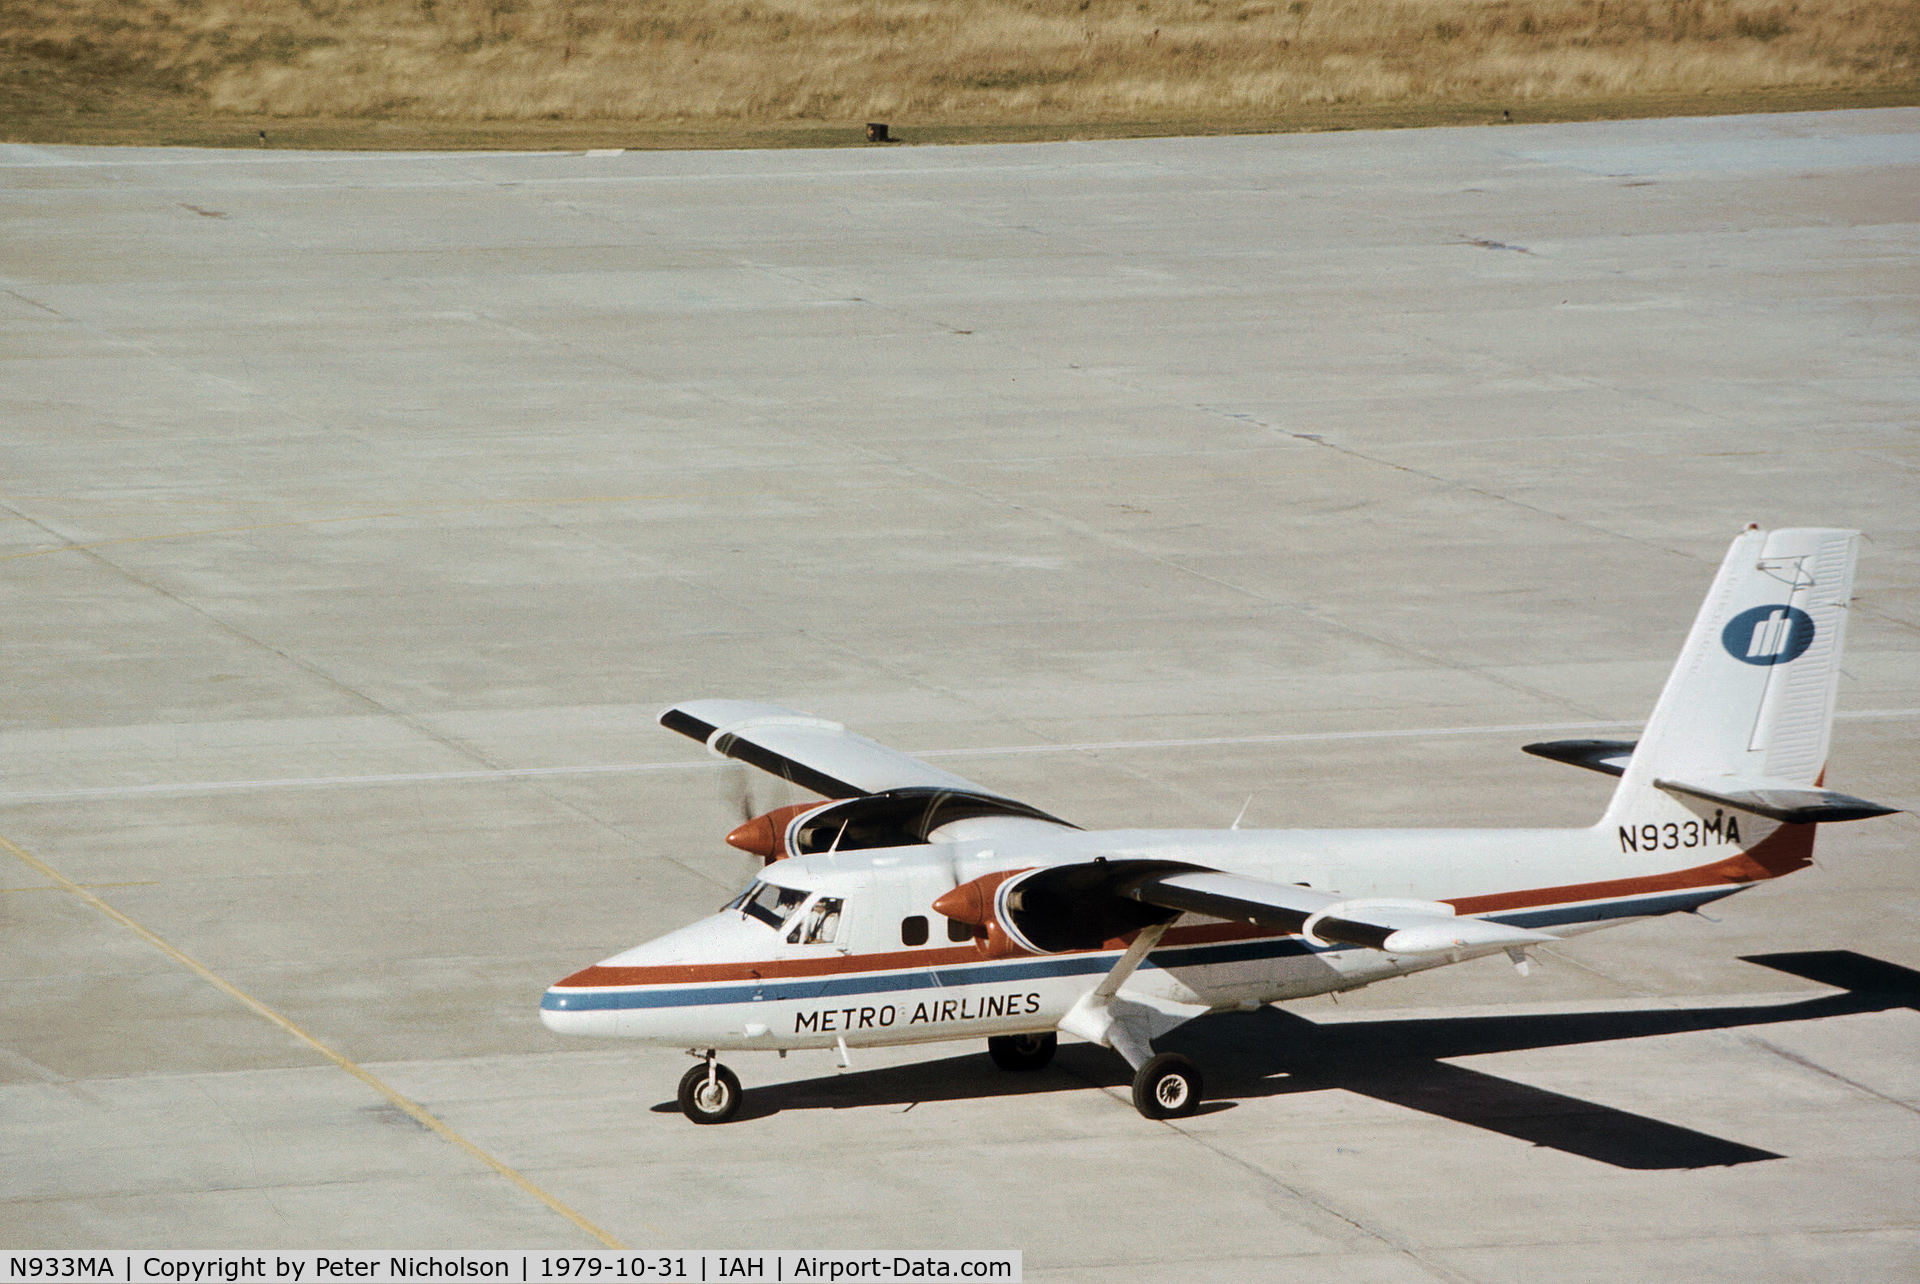 N933MA, 1979 De Havilland Canada DHC-6-300 Twin Otter C/N 614, Twin Otter 300 of Metro Airlines arriving at Houston International in October 1979.